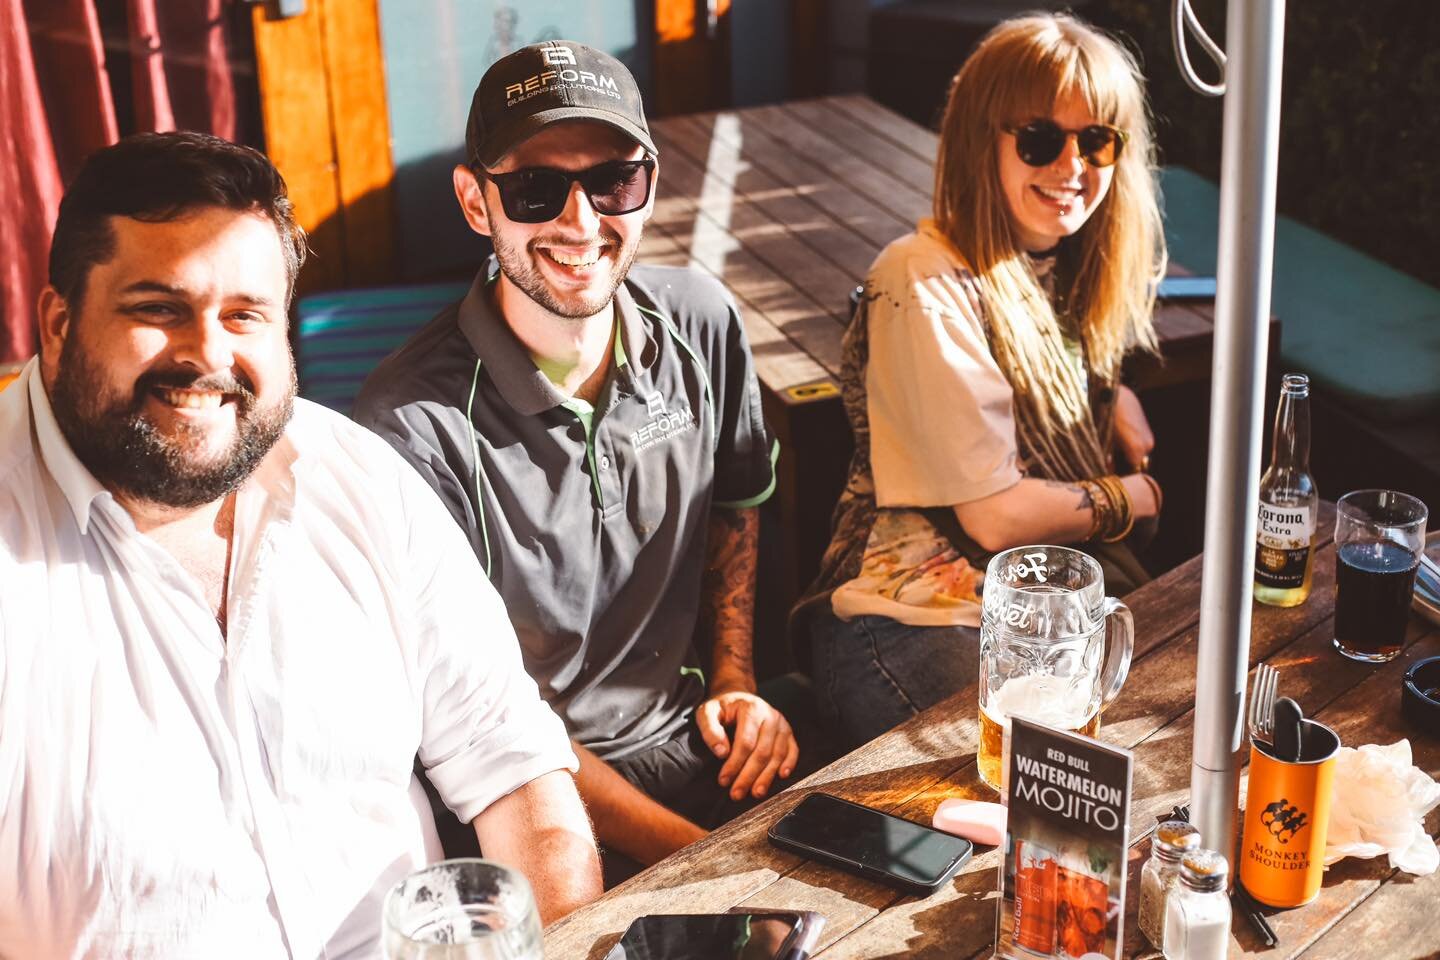 Smiles all round because it&rsquo;s Thirsty Thursday at the Fox!

Make use of today&rsquo;s special, tower of beer &amp; a platter from $65 🍻

It&rsquo;s a big yes from the crew ⬇️